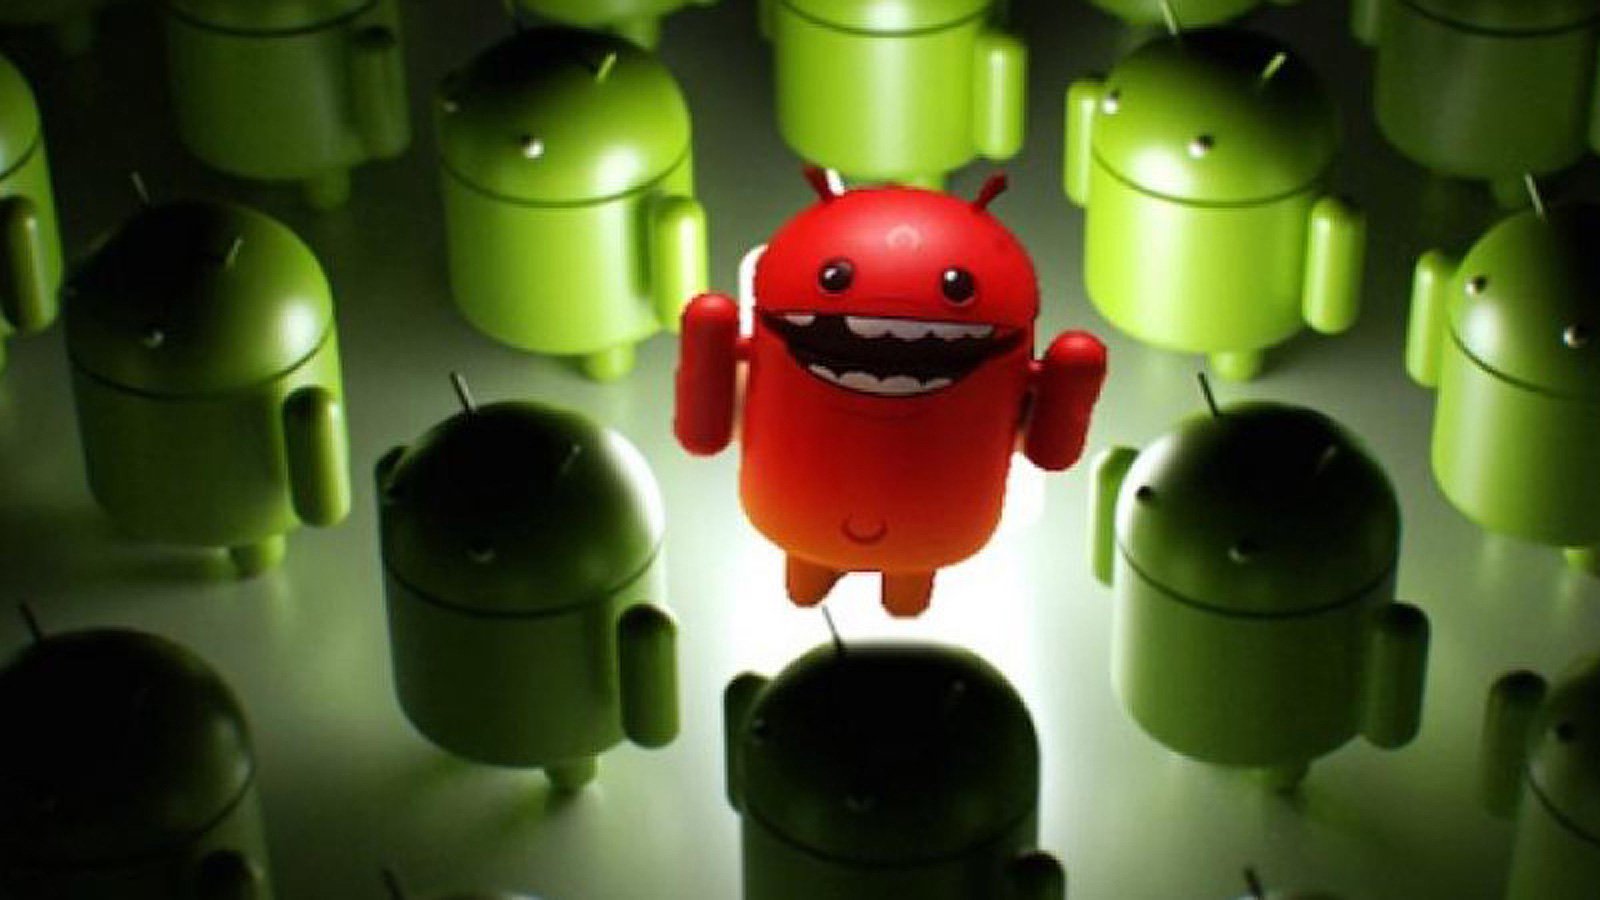 Malicious Android app discovered powering account creation service